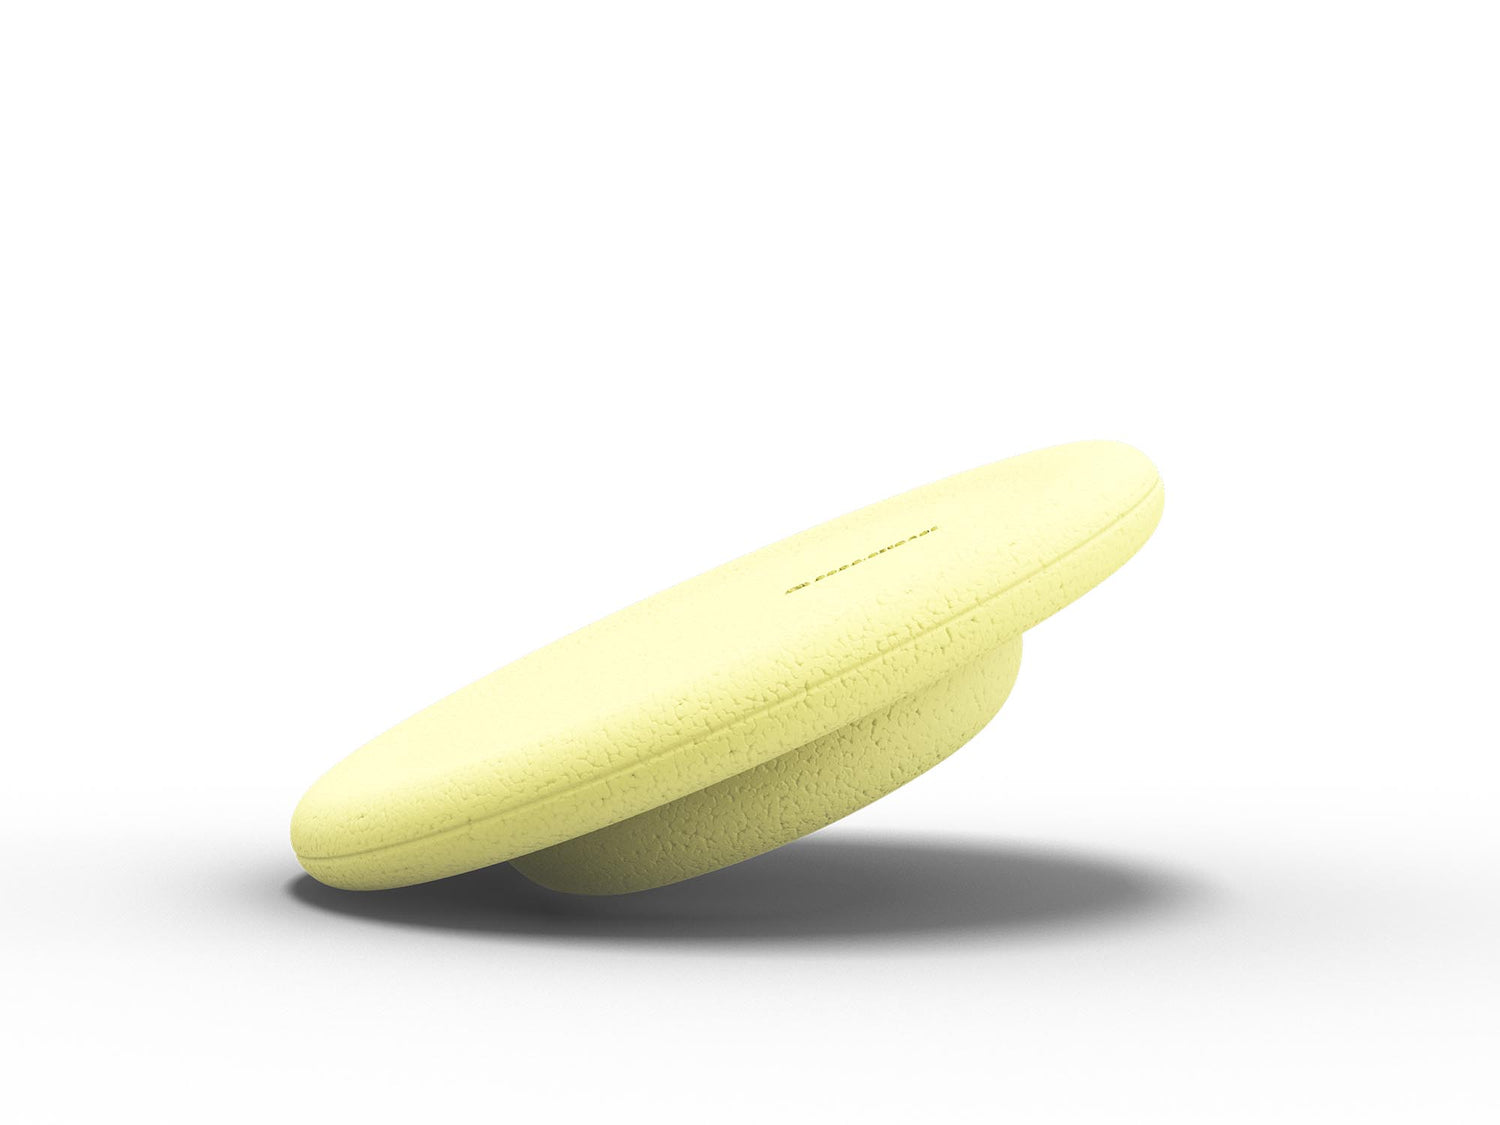 Pastel yellow lightweight balance board for workout and active play for kids. Combined with the stacking stones. Used for yoga and physical therapy. 